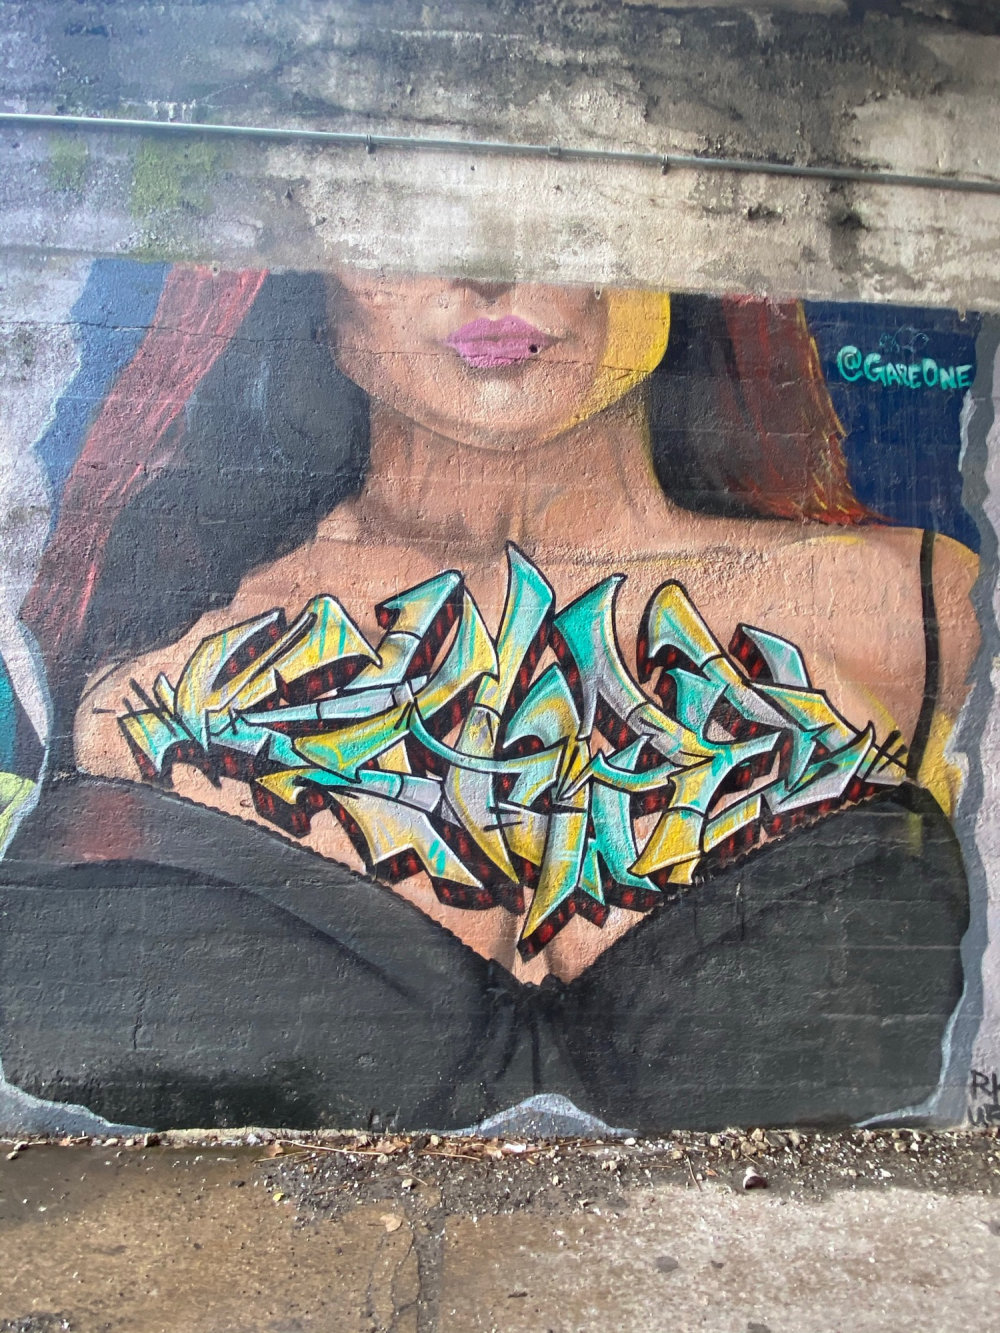 mural in Chicago by artist Gape One.